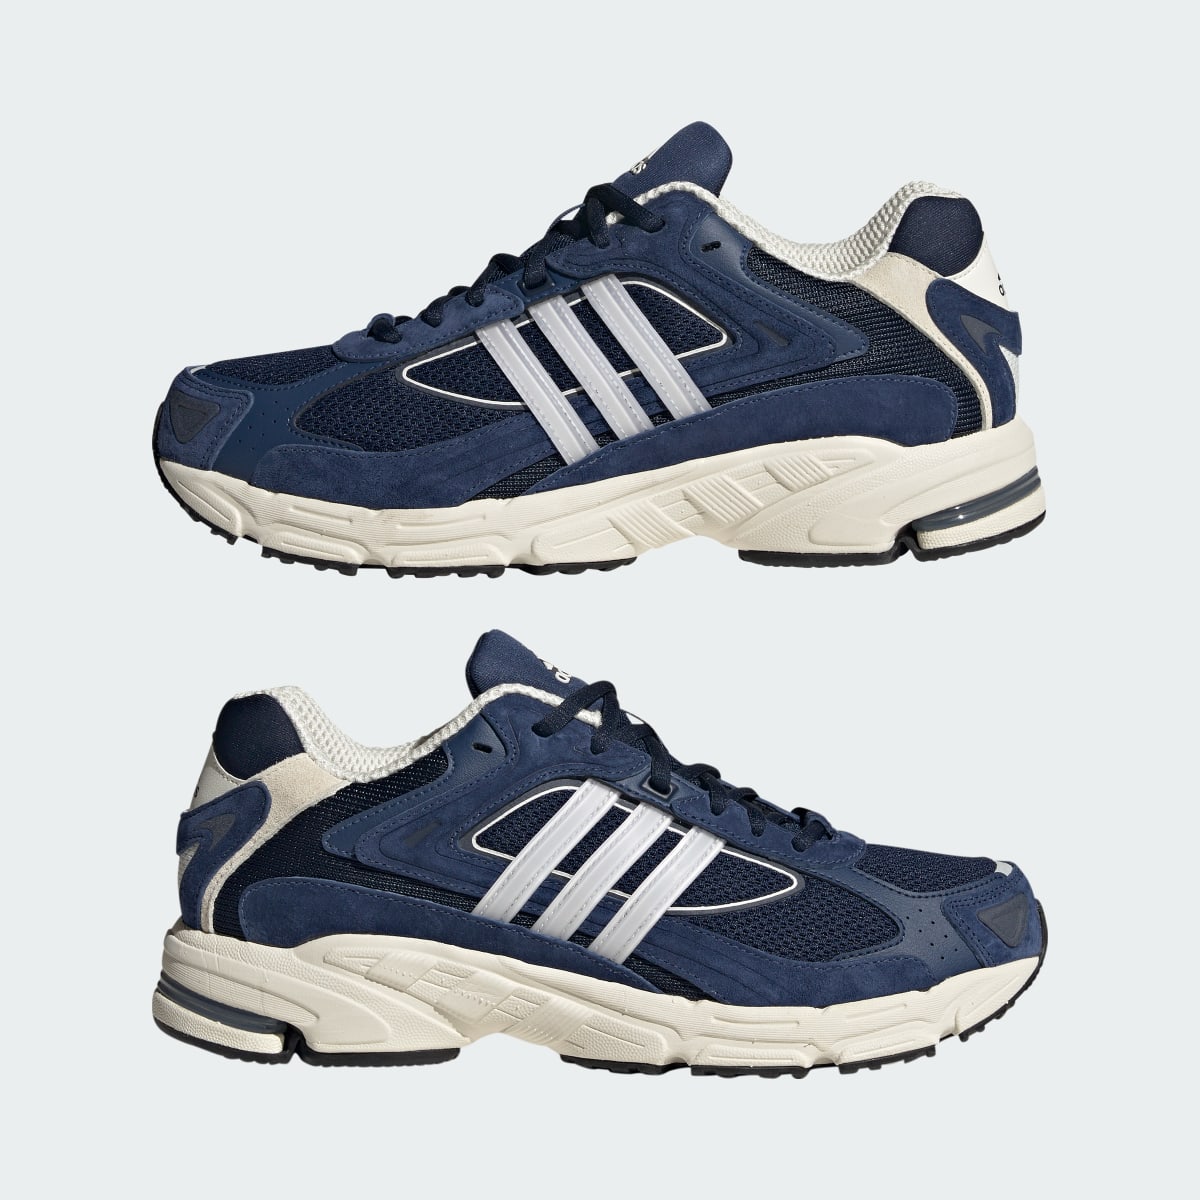 Adidas Response CL Shoes. 8